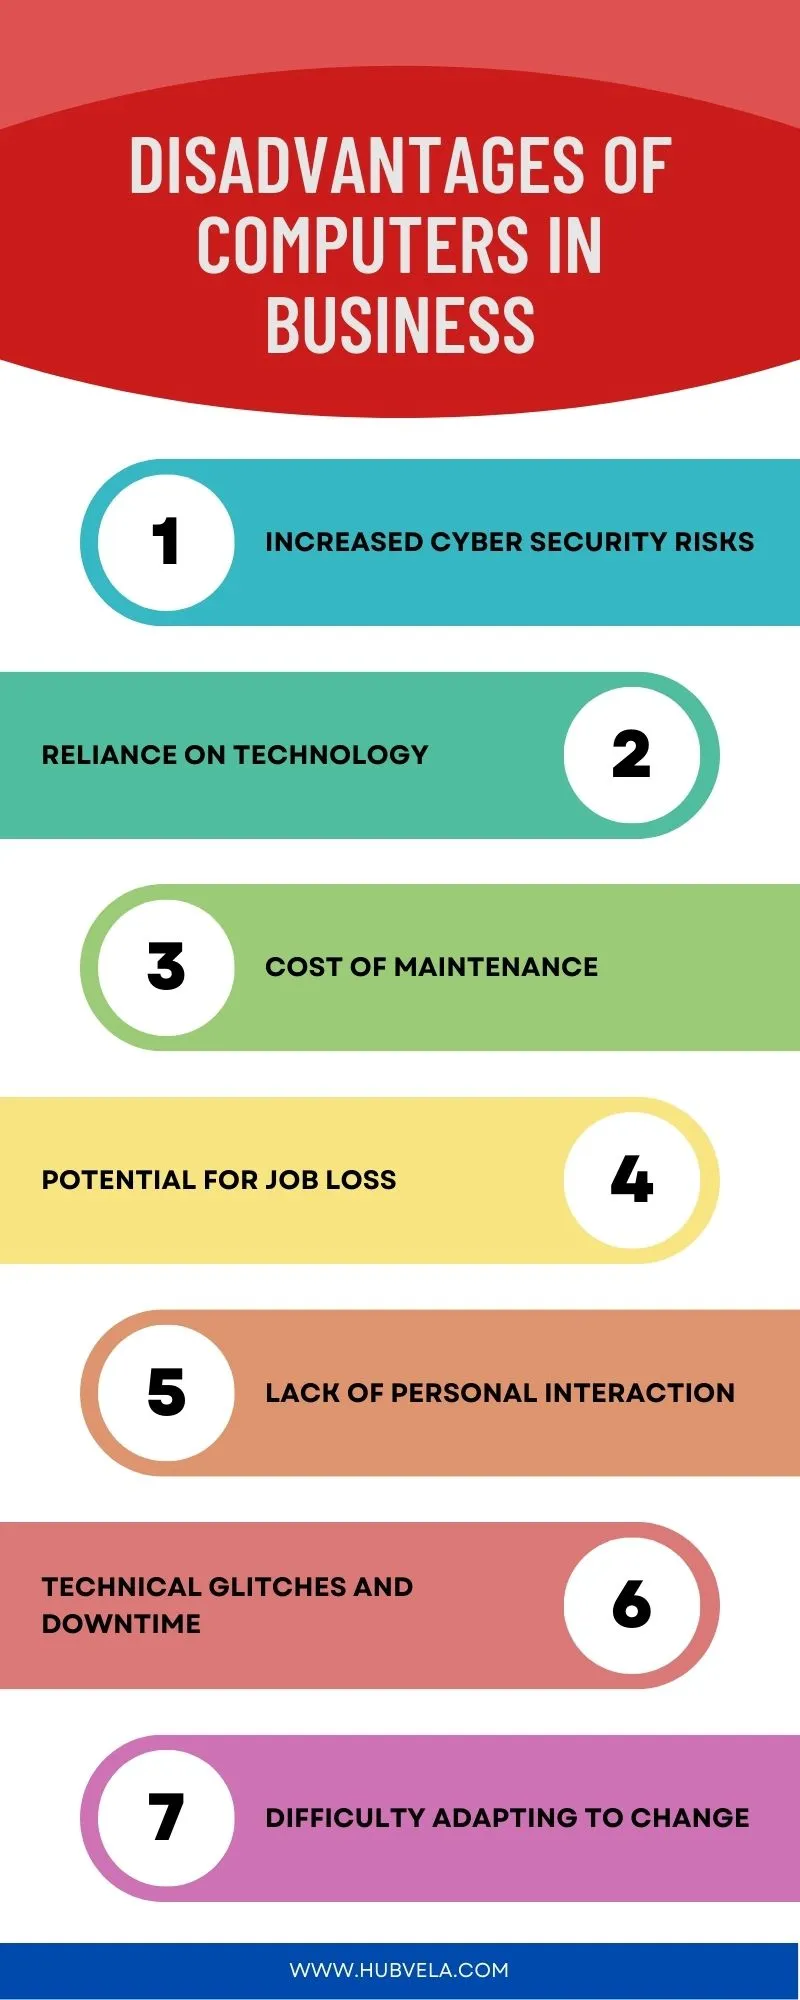 Disadvantages of Computers in Business Infographic